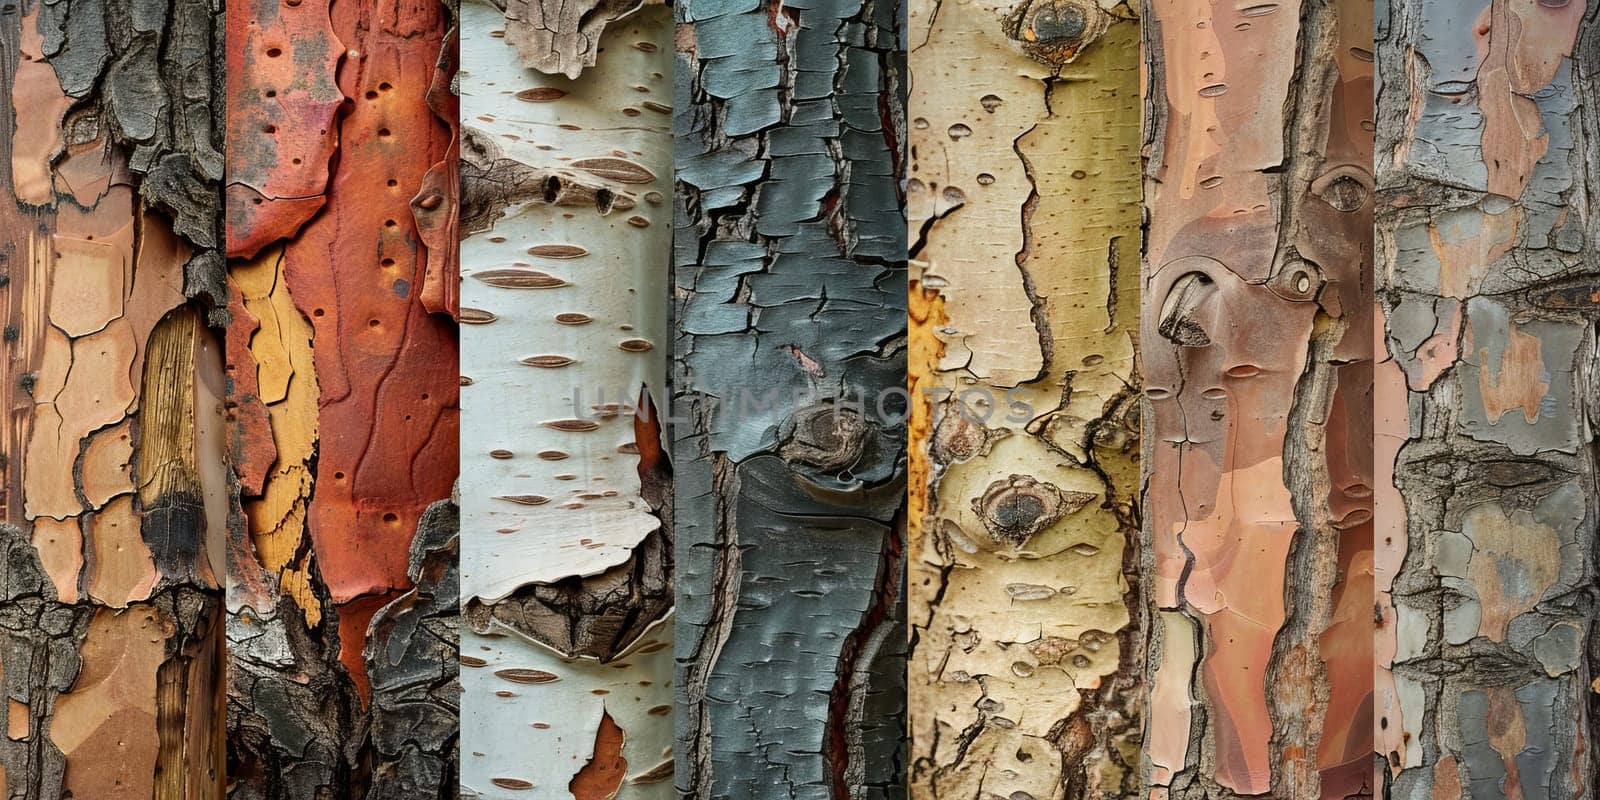 Different kinds of tree barks intricate details and natural artistry of a bark formations by Kadula